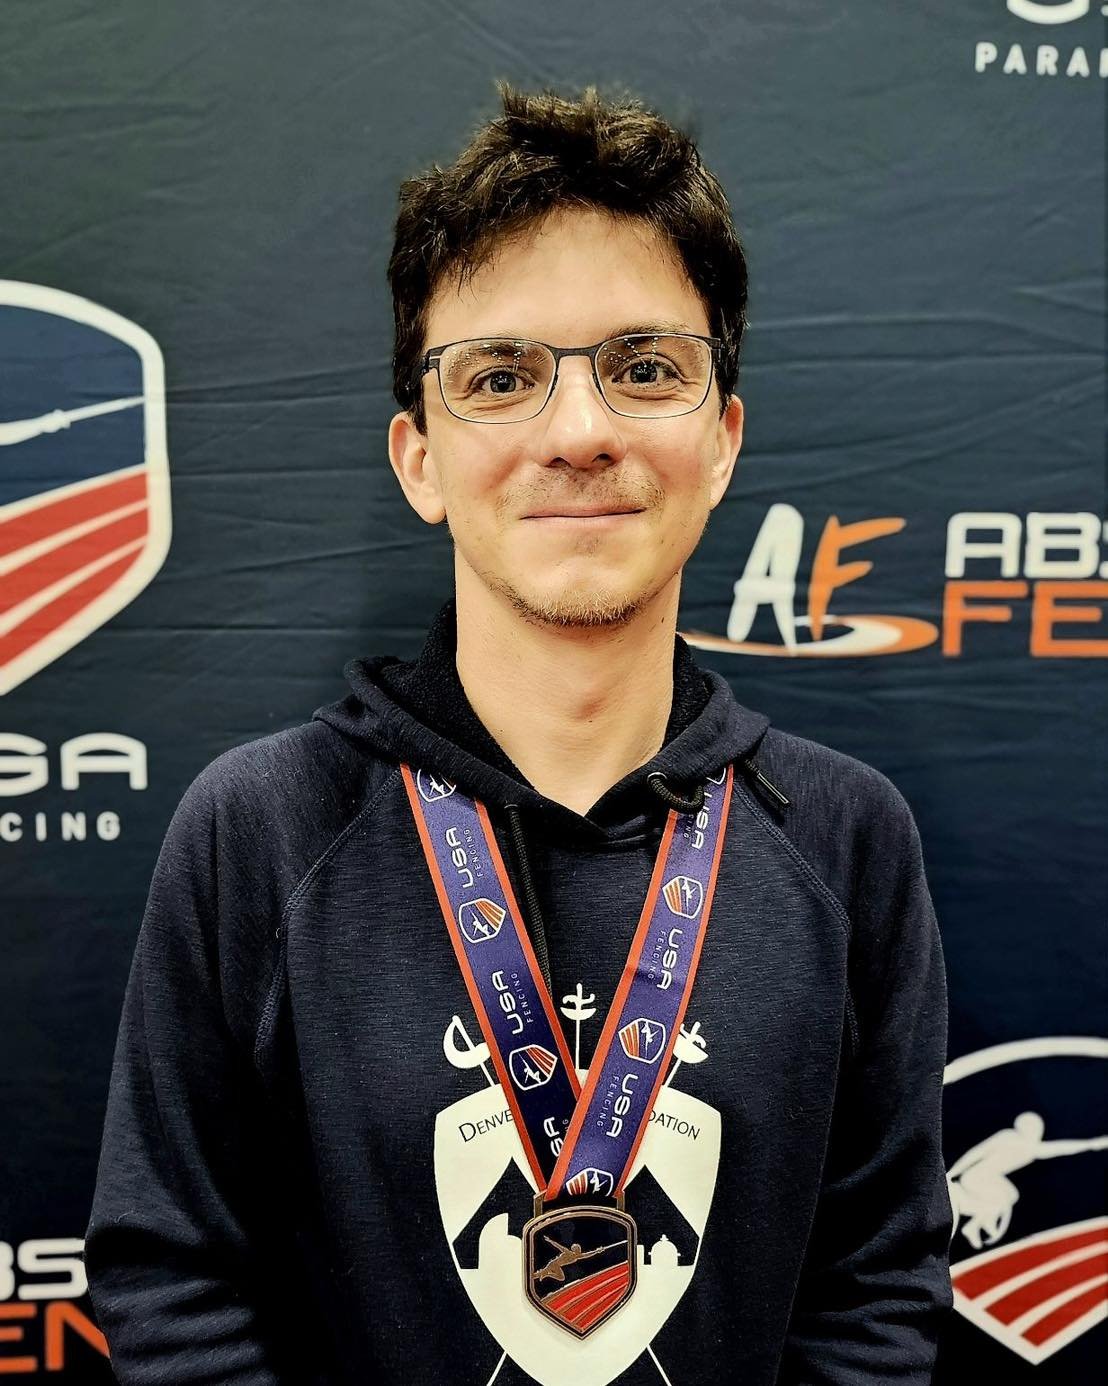 Phil Baranowski earned his first National medal by finishing 6th in Vet 40 Men&rsquo;s Epee.  Congratulations Phil! 

#&eacute;p&eacute;e #denvercolorado #fencinglife #denverfencingcenter #epee #denver #fencing #womenepee #mensepee #denverfencing #de